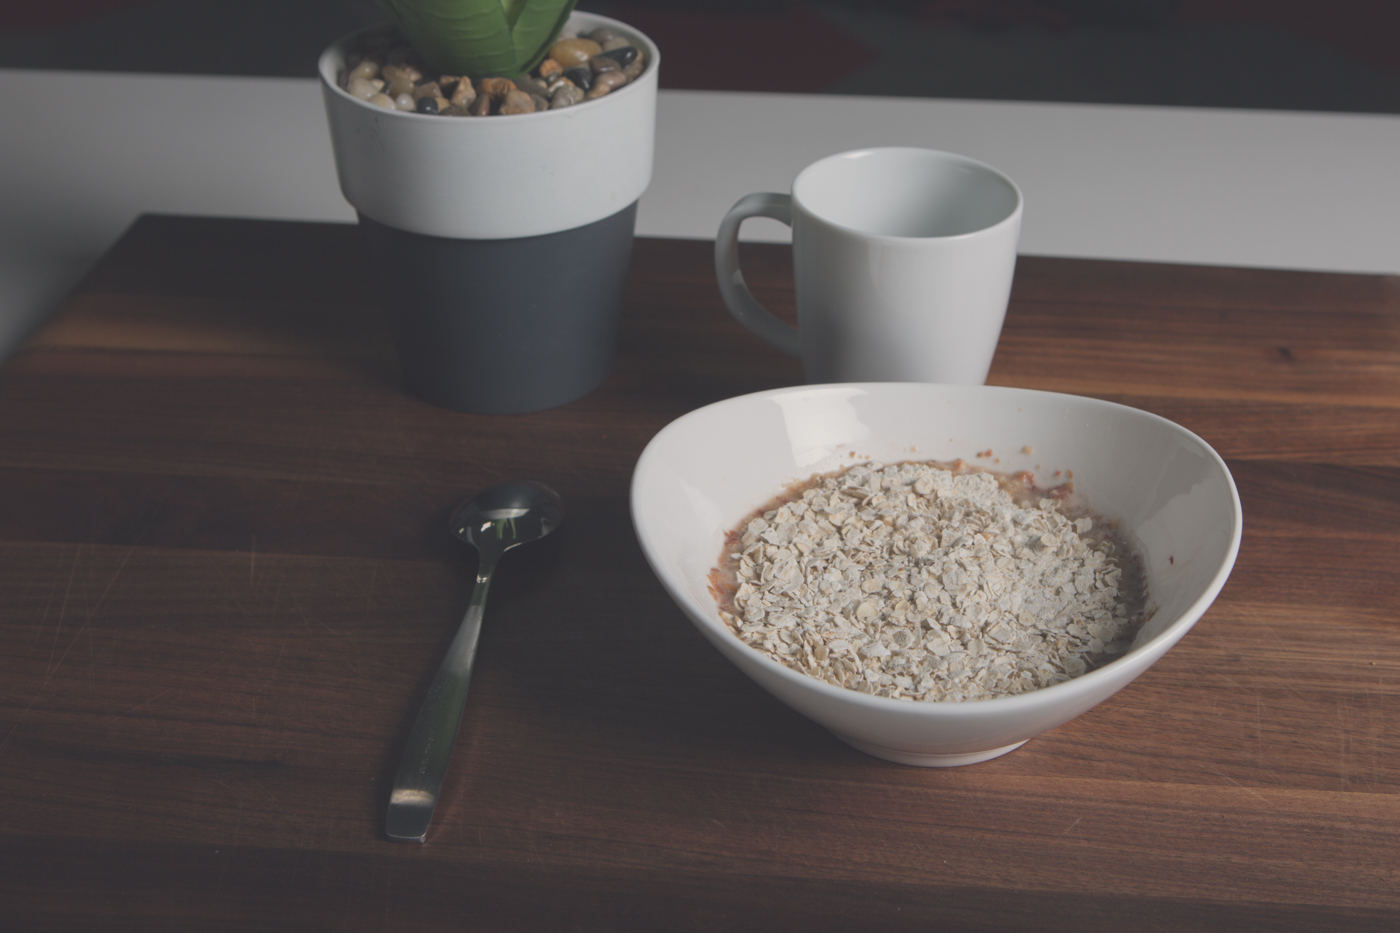 Bowl of oatmeals on timber table